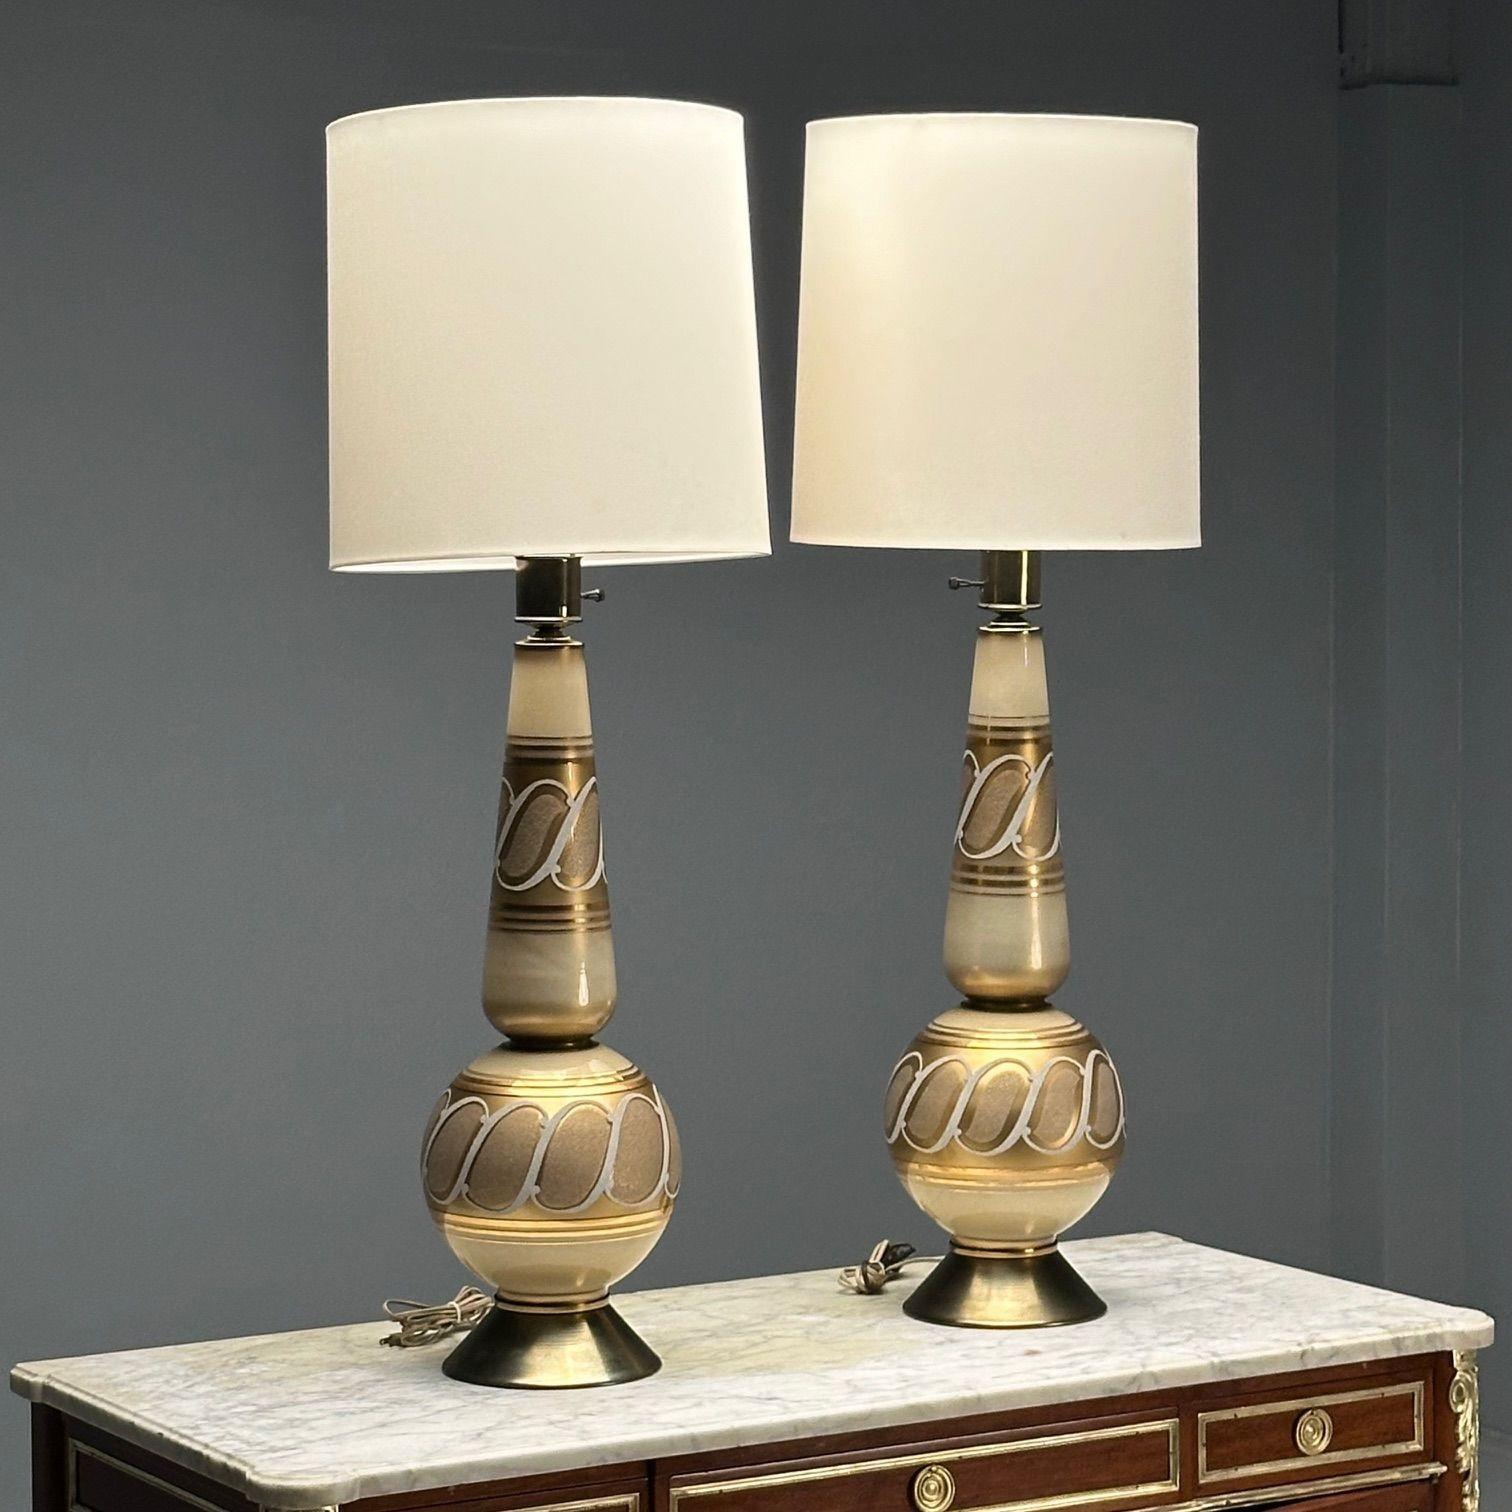 Italian Mid-Century Modern, Large Table Lamps, Gold Glass, Brass, Italy, 1960s In Good Condition For Sale In Stamford, CT